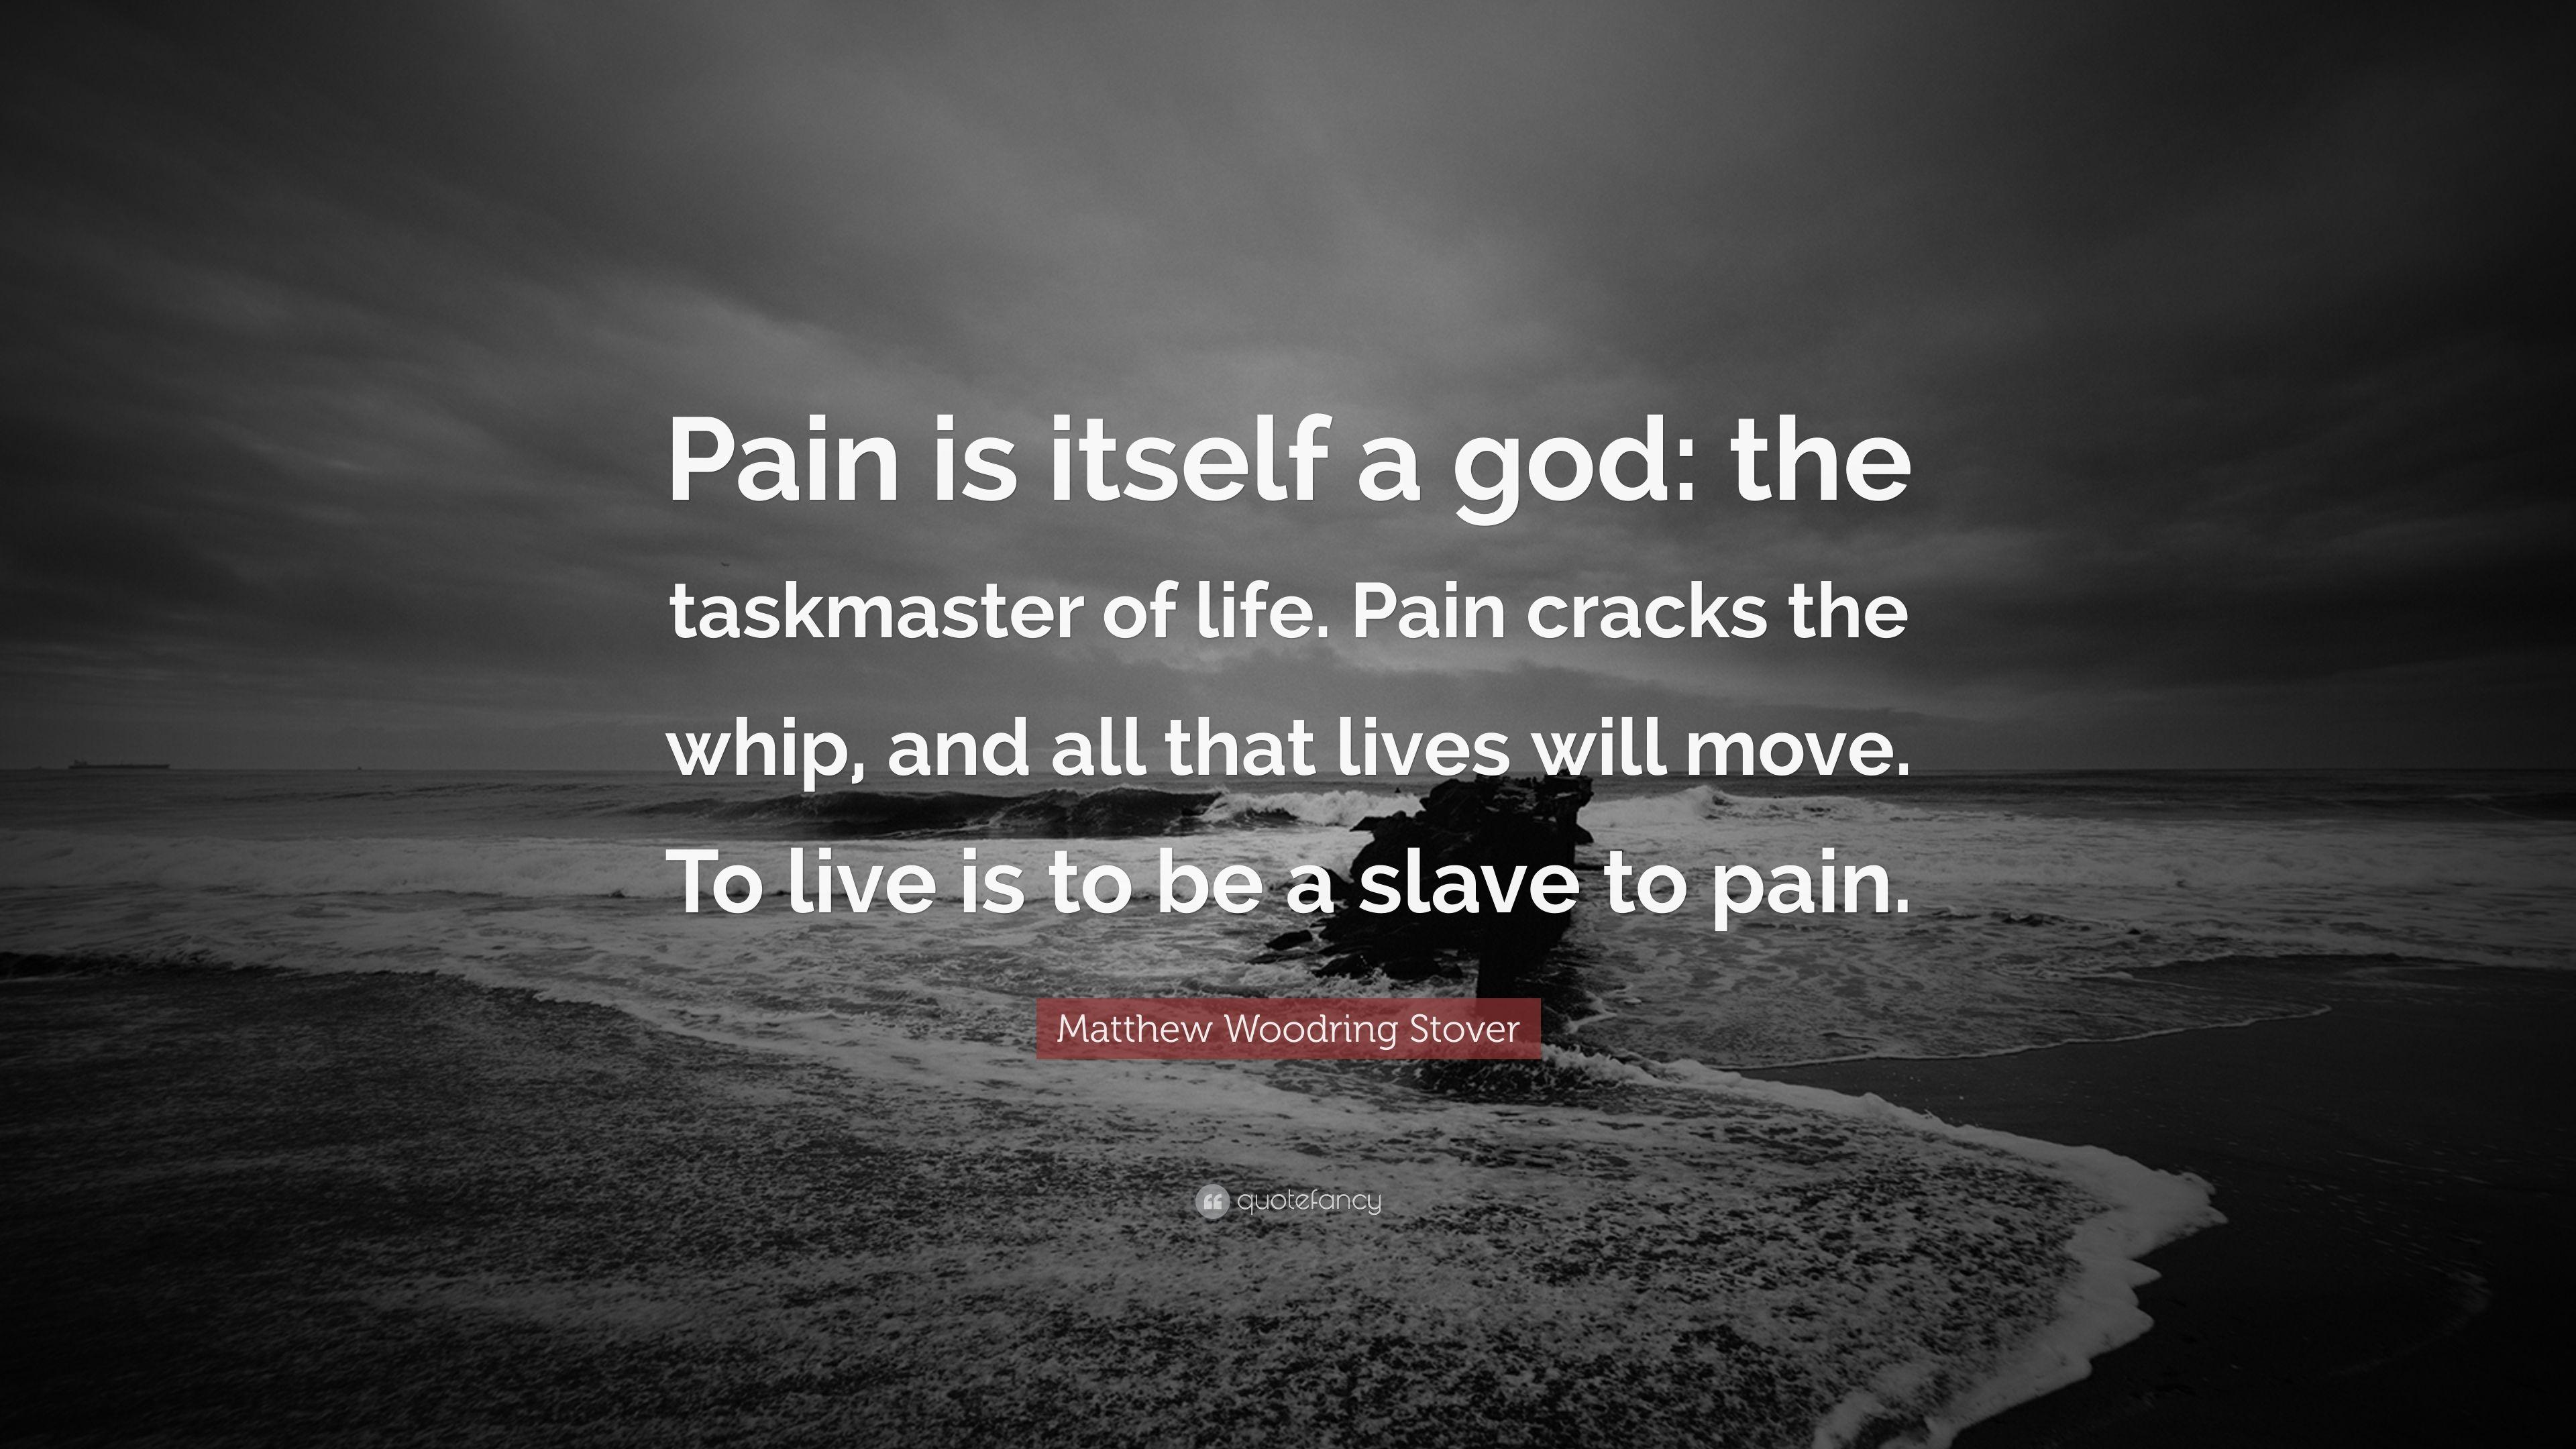 Matthew Woodring Stover Quote: “Pain is itself a god: the taskmaster